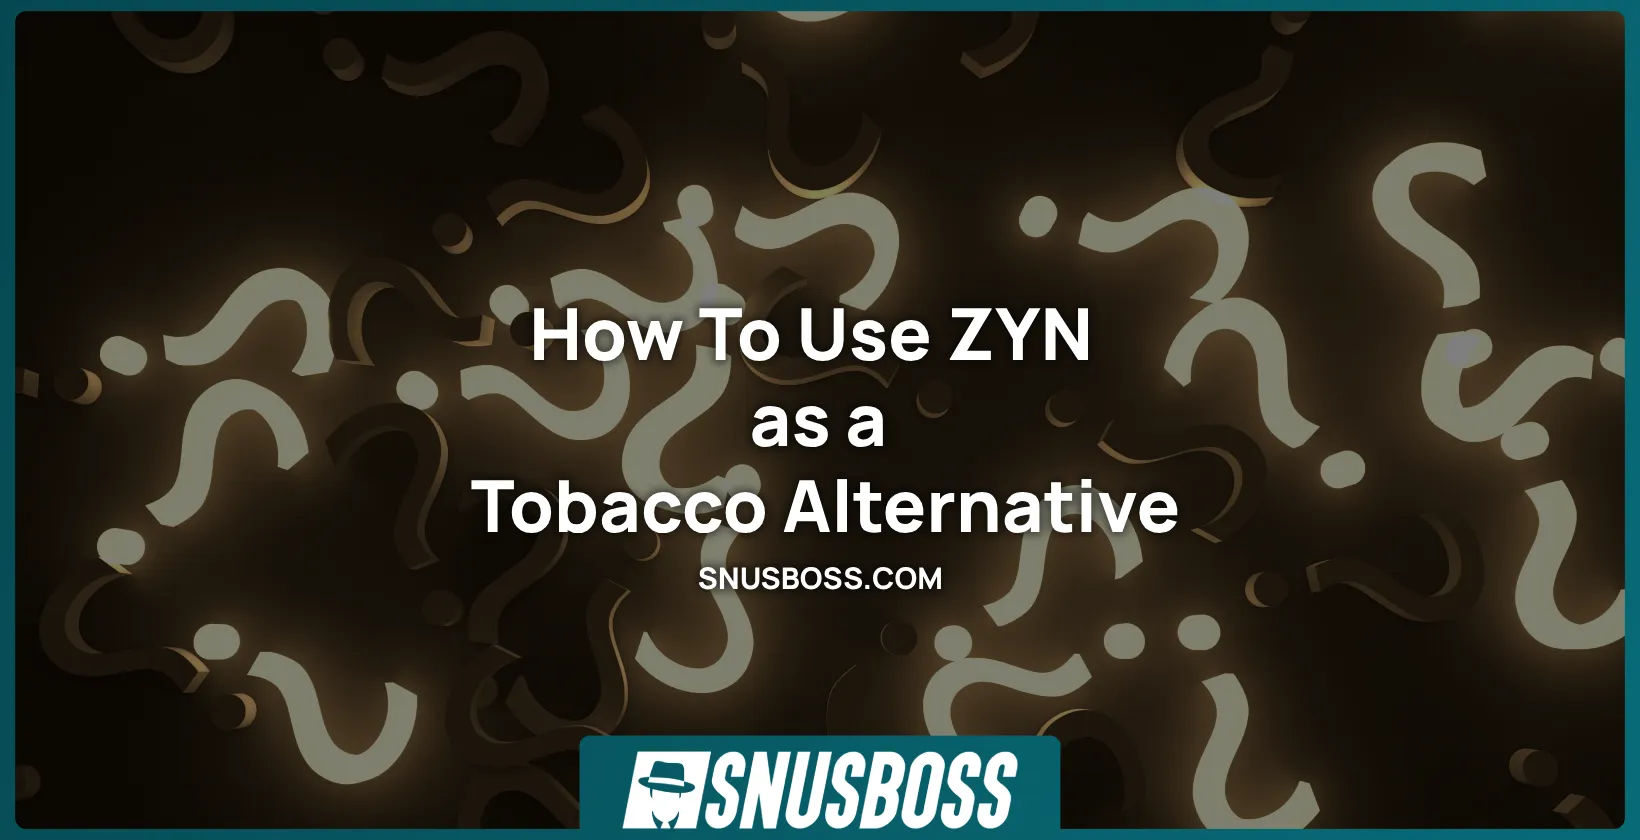 How To Use ZYN as a Tobacco Alternative